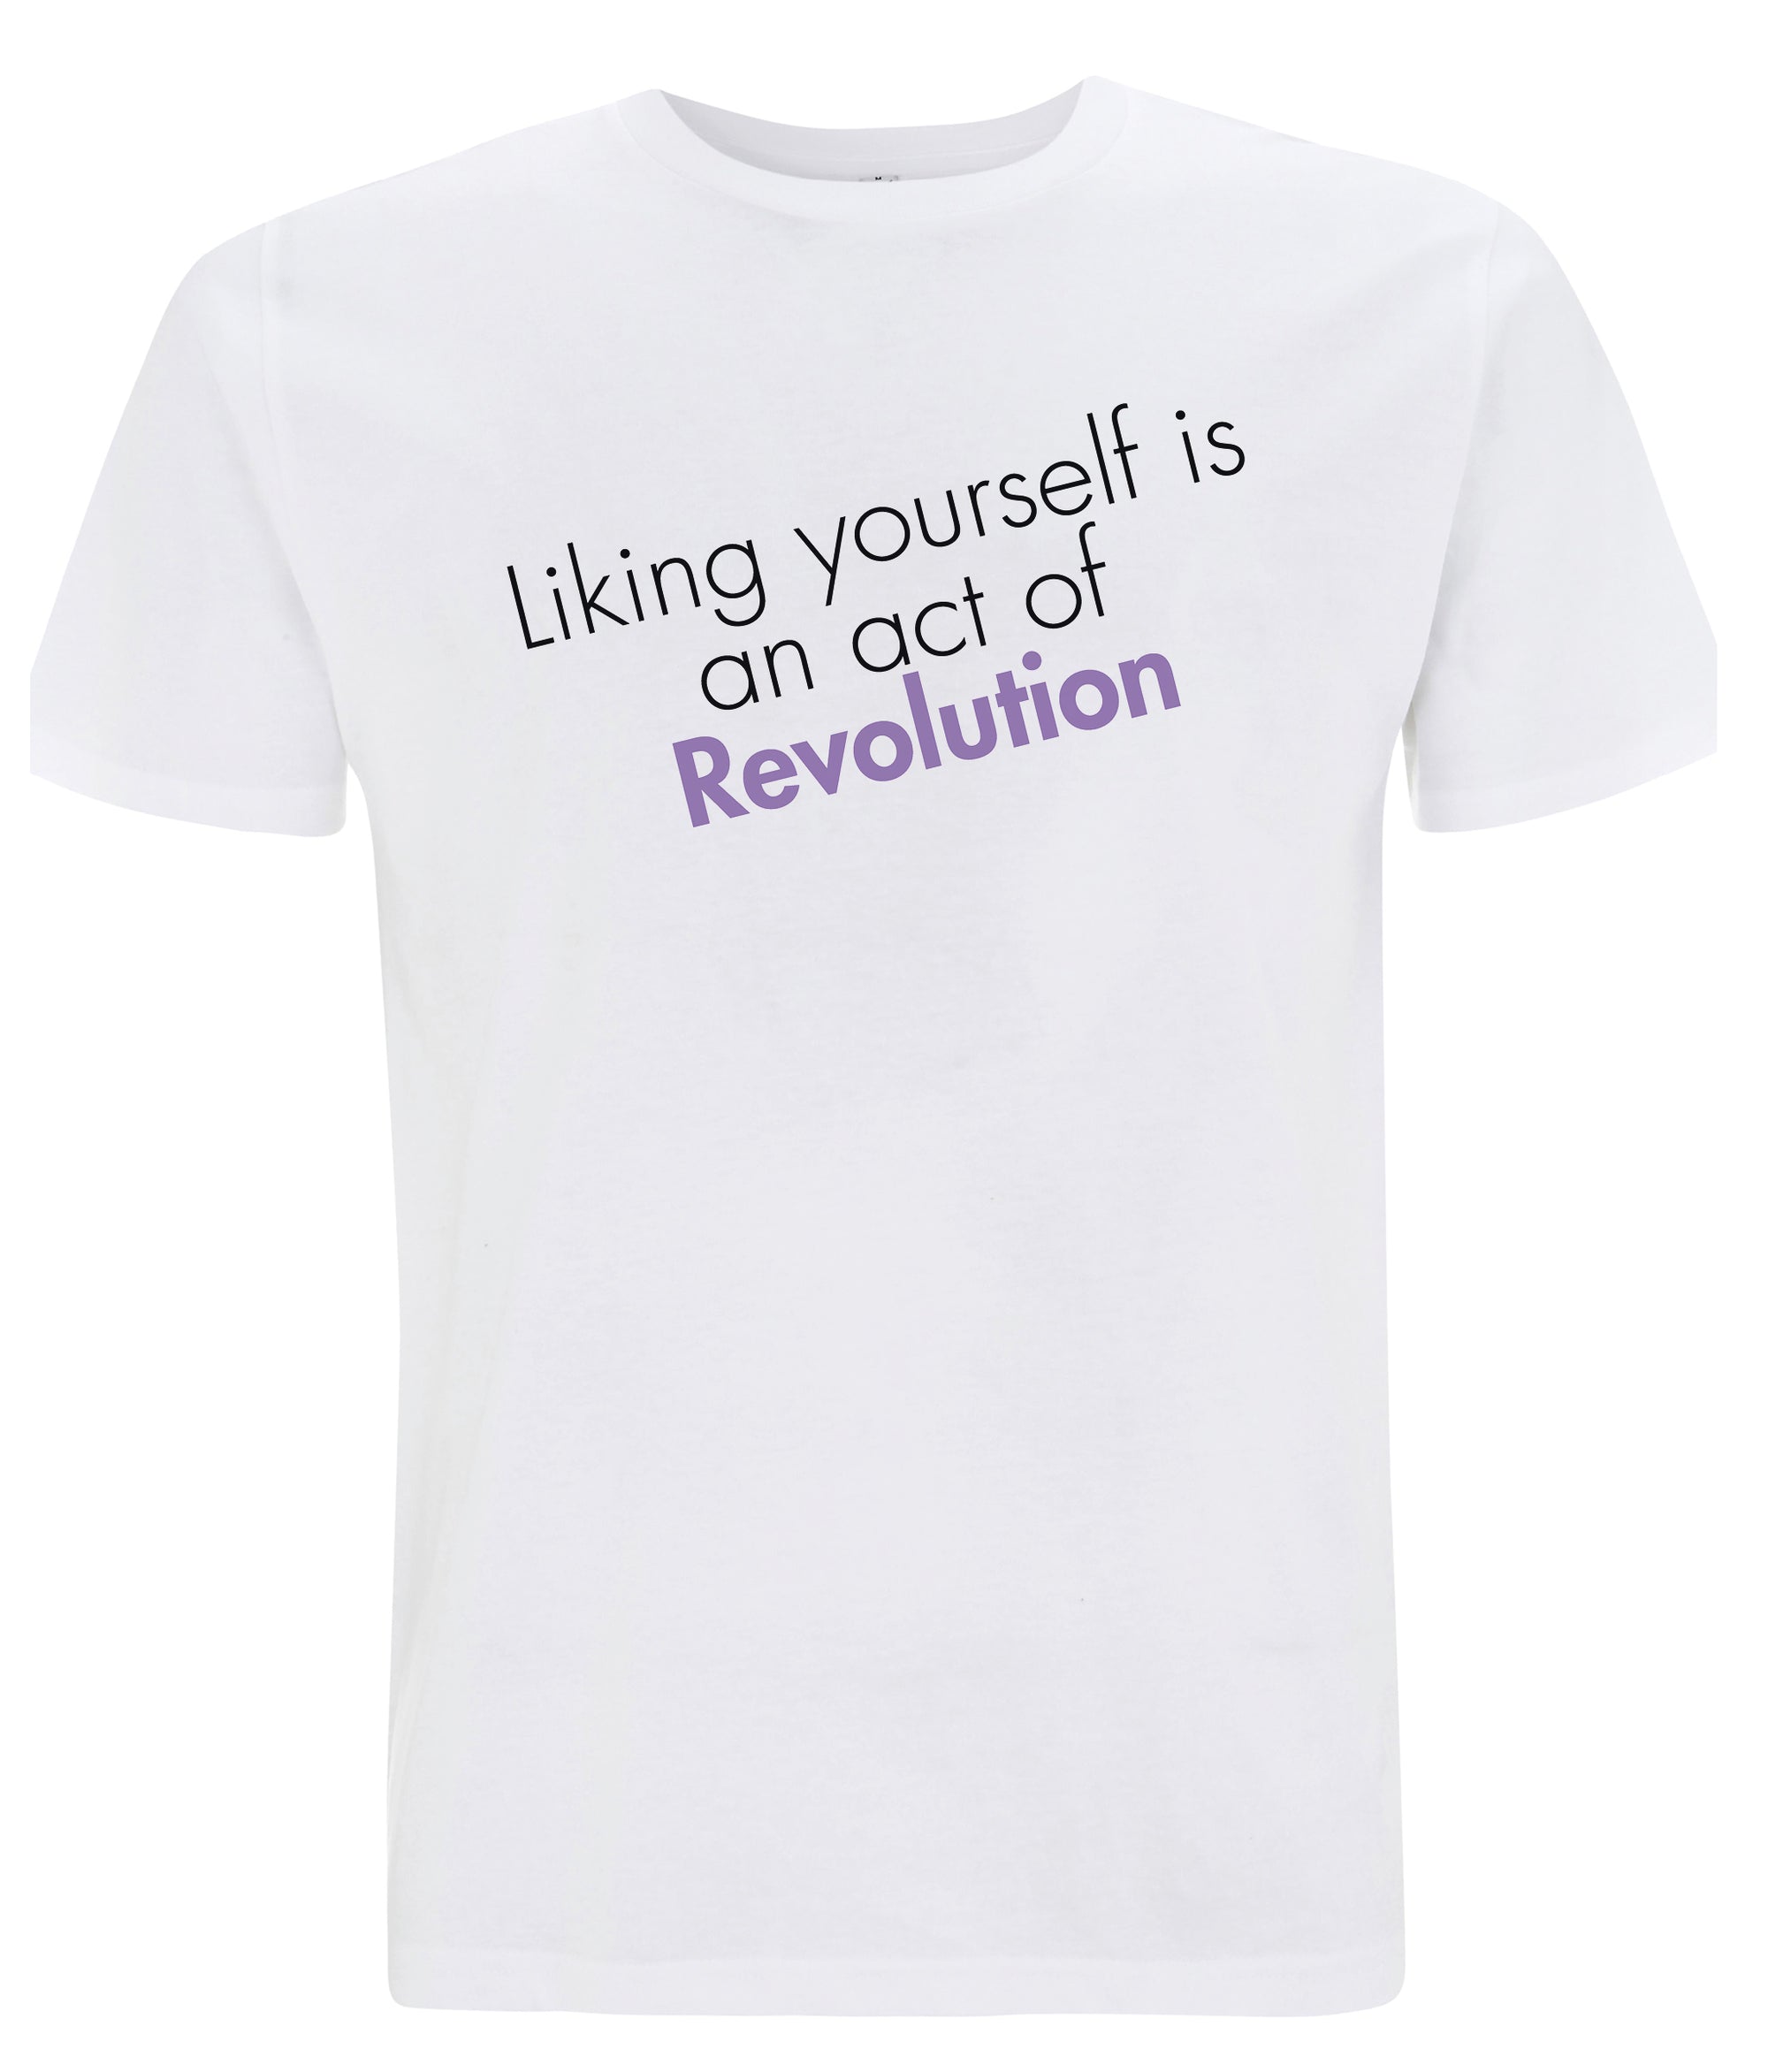 Liking Yourself Is An Act Of Revolution Organic Feminist T Shirt Black